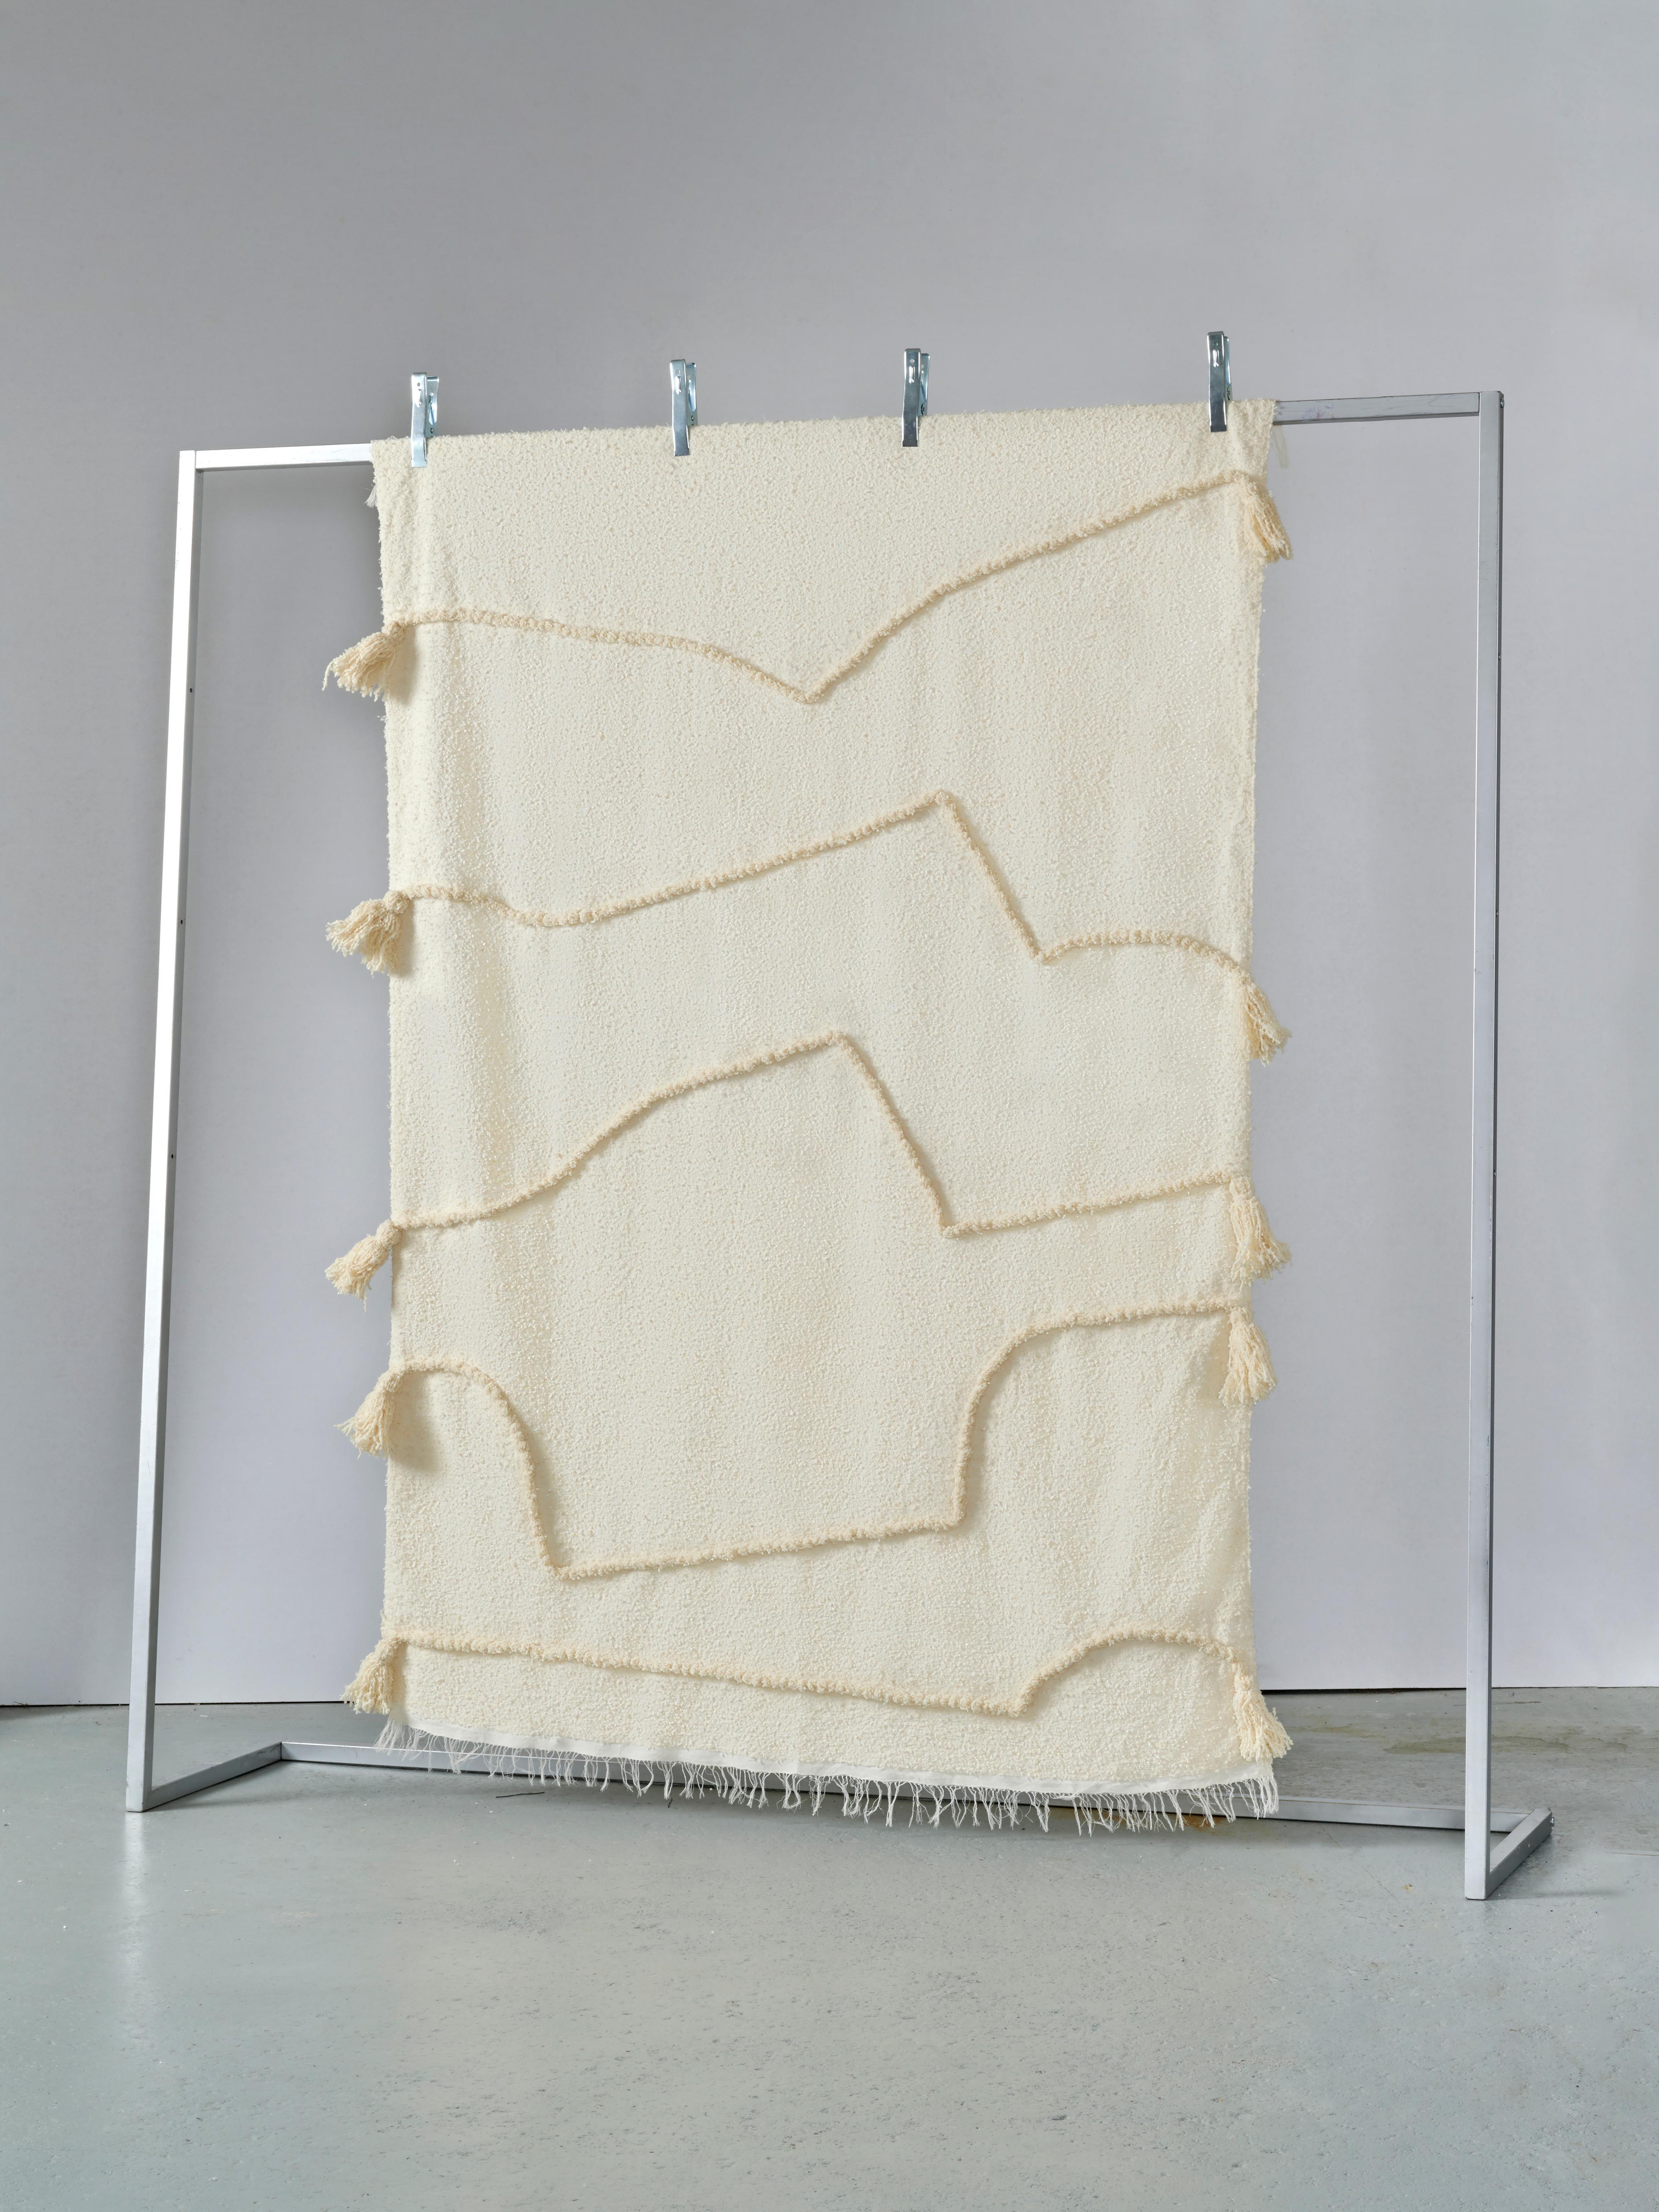 The Entwine collection of blankets and rugs by Maria Jeglinska shows a more random application of colors and lines, the poetic of the grid is still there but the design is moving towards its decomposition. The cross-cultural contamination is